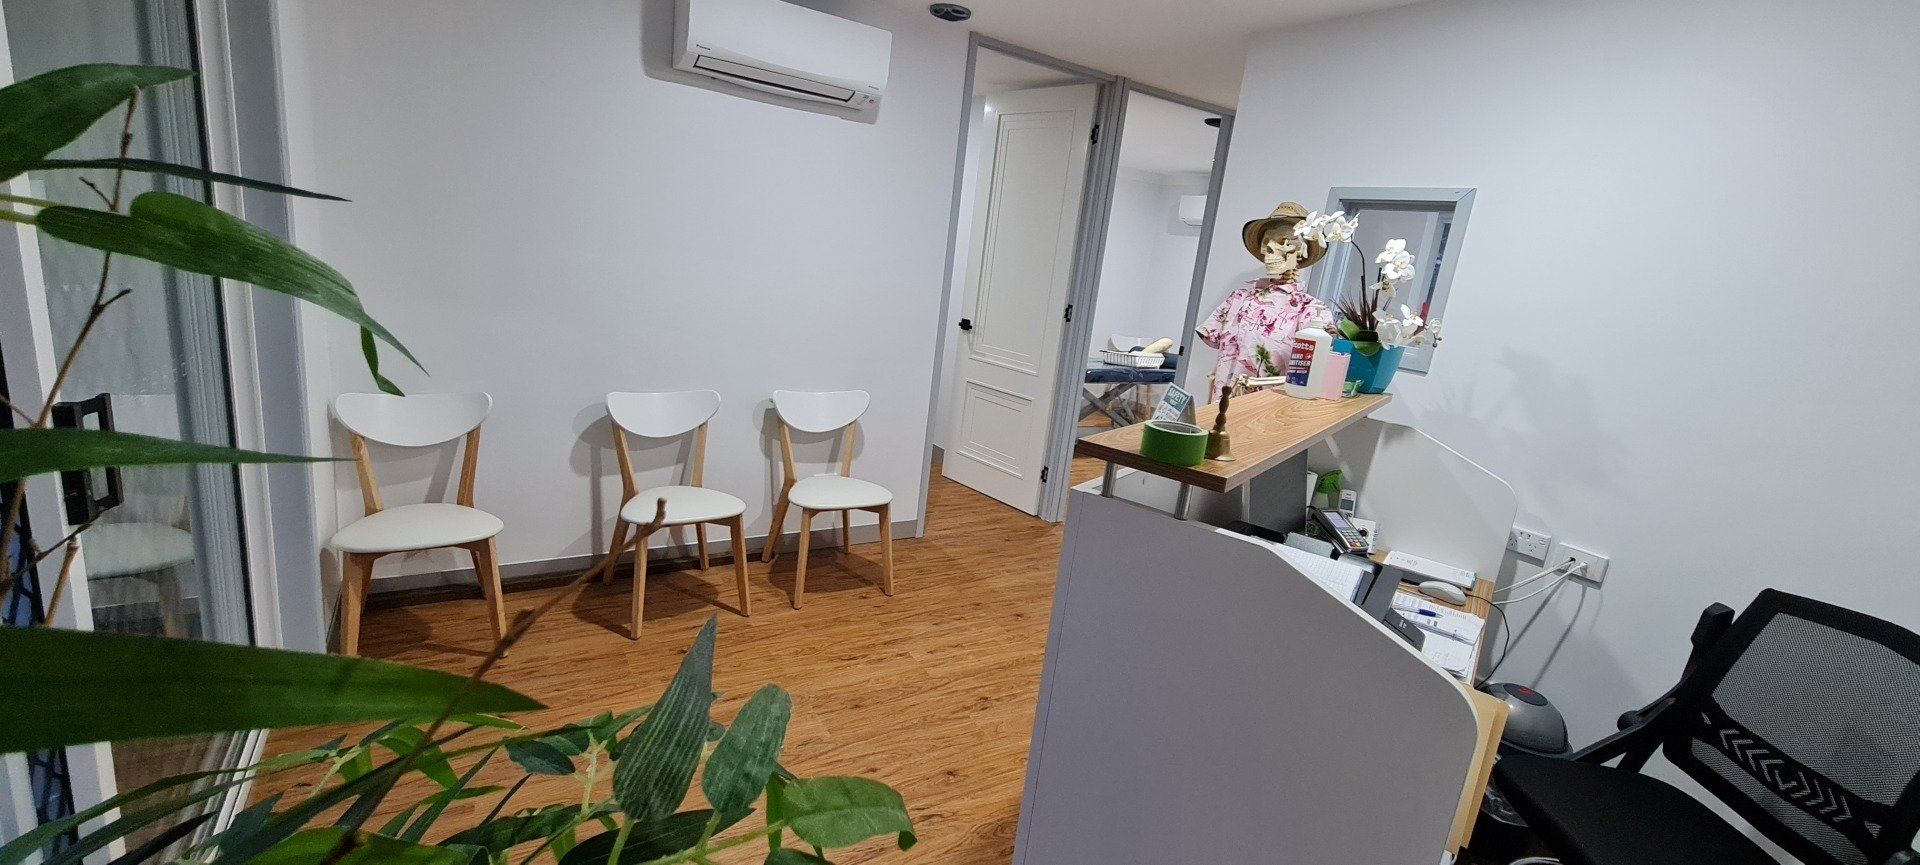 Osteopathic clinic reception waiting room located at Gaven on the Gold Coast